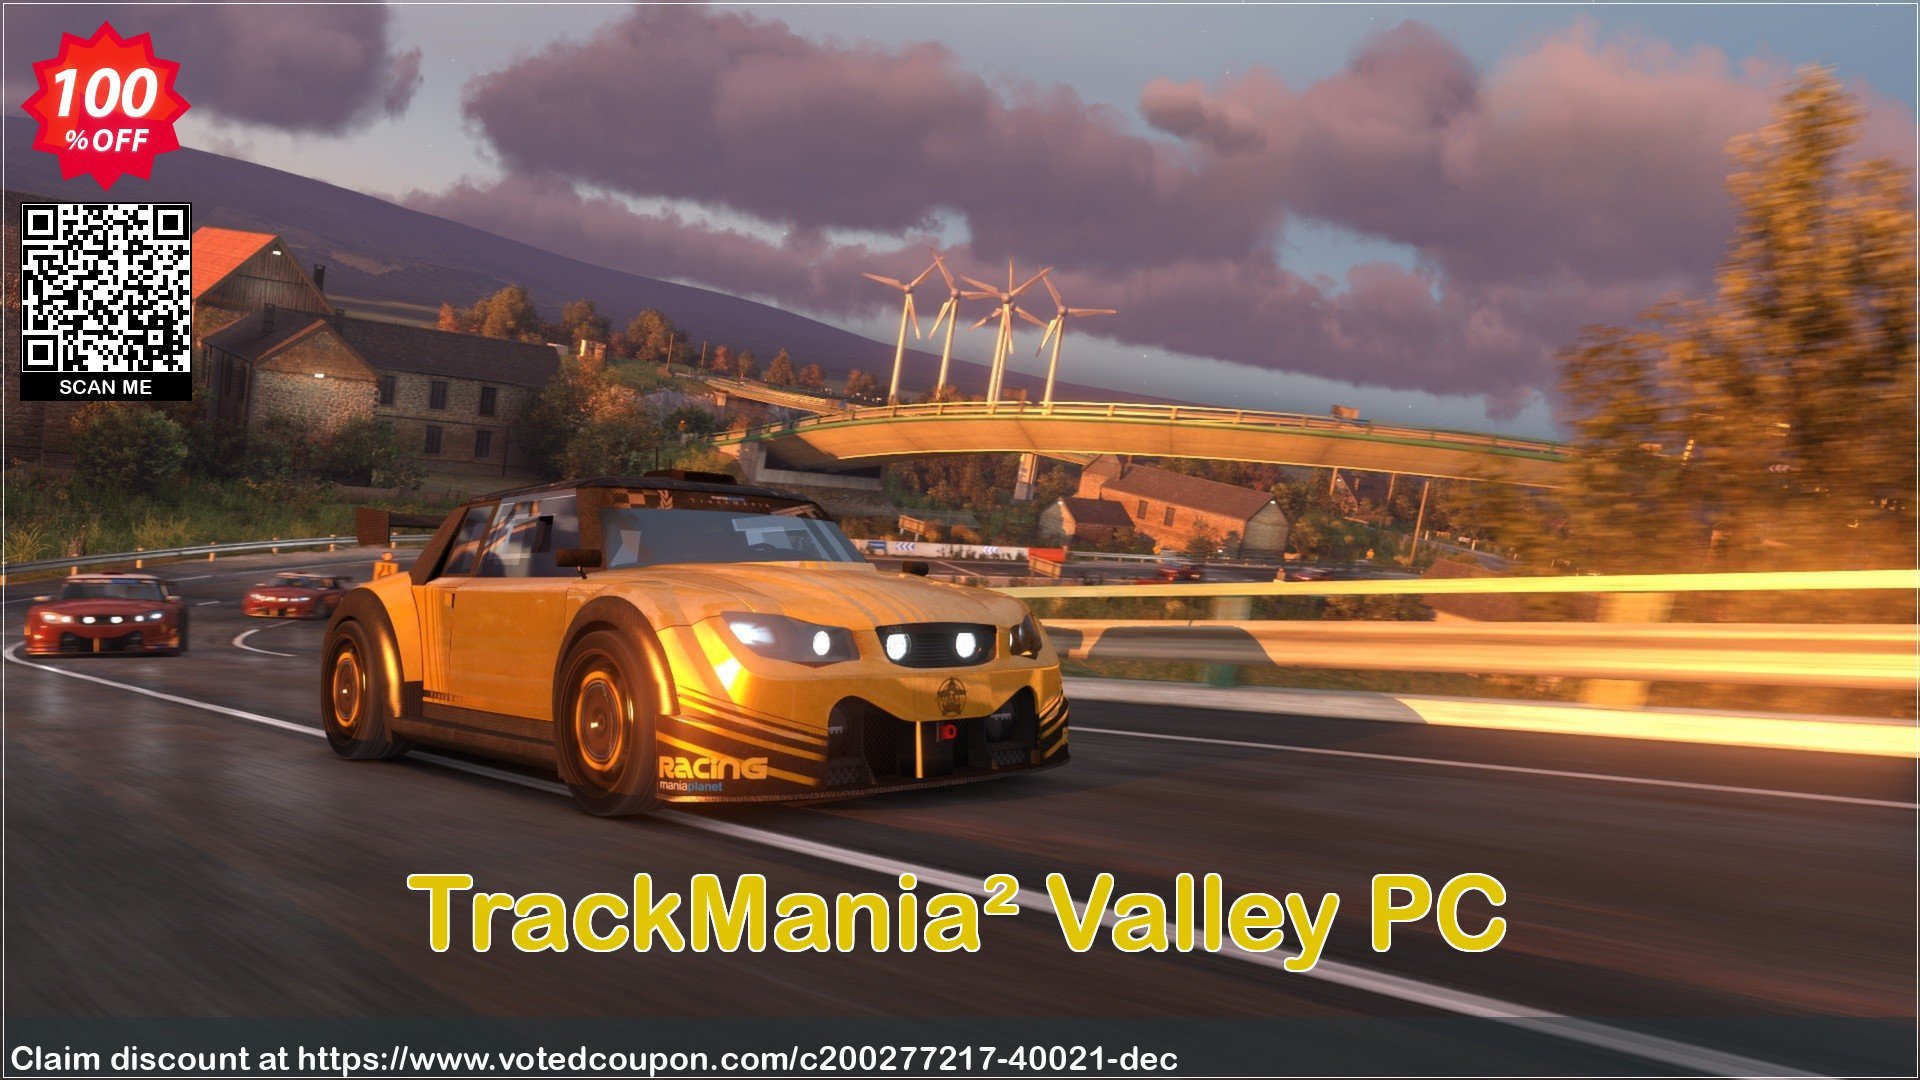 TrackMania² Valley PC Coupon Code May 2024, 100% OFF - VotedCoupon